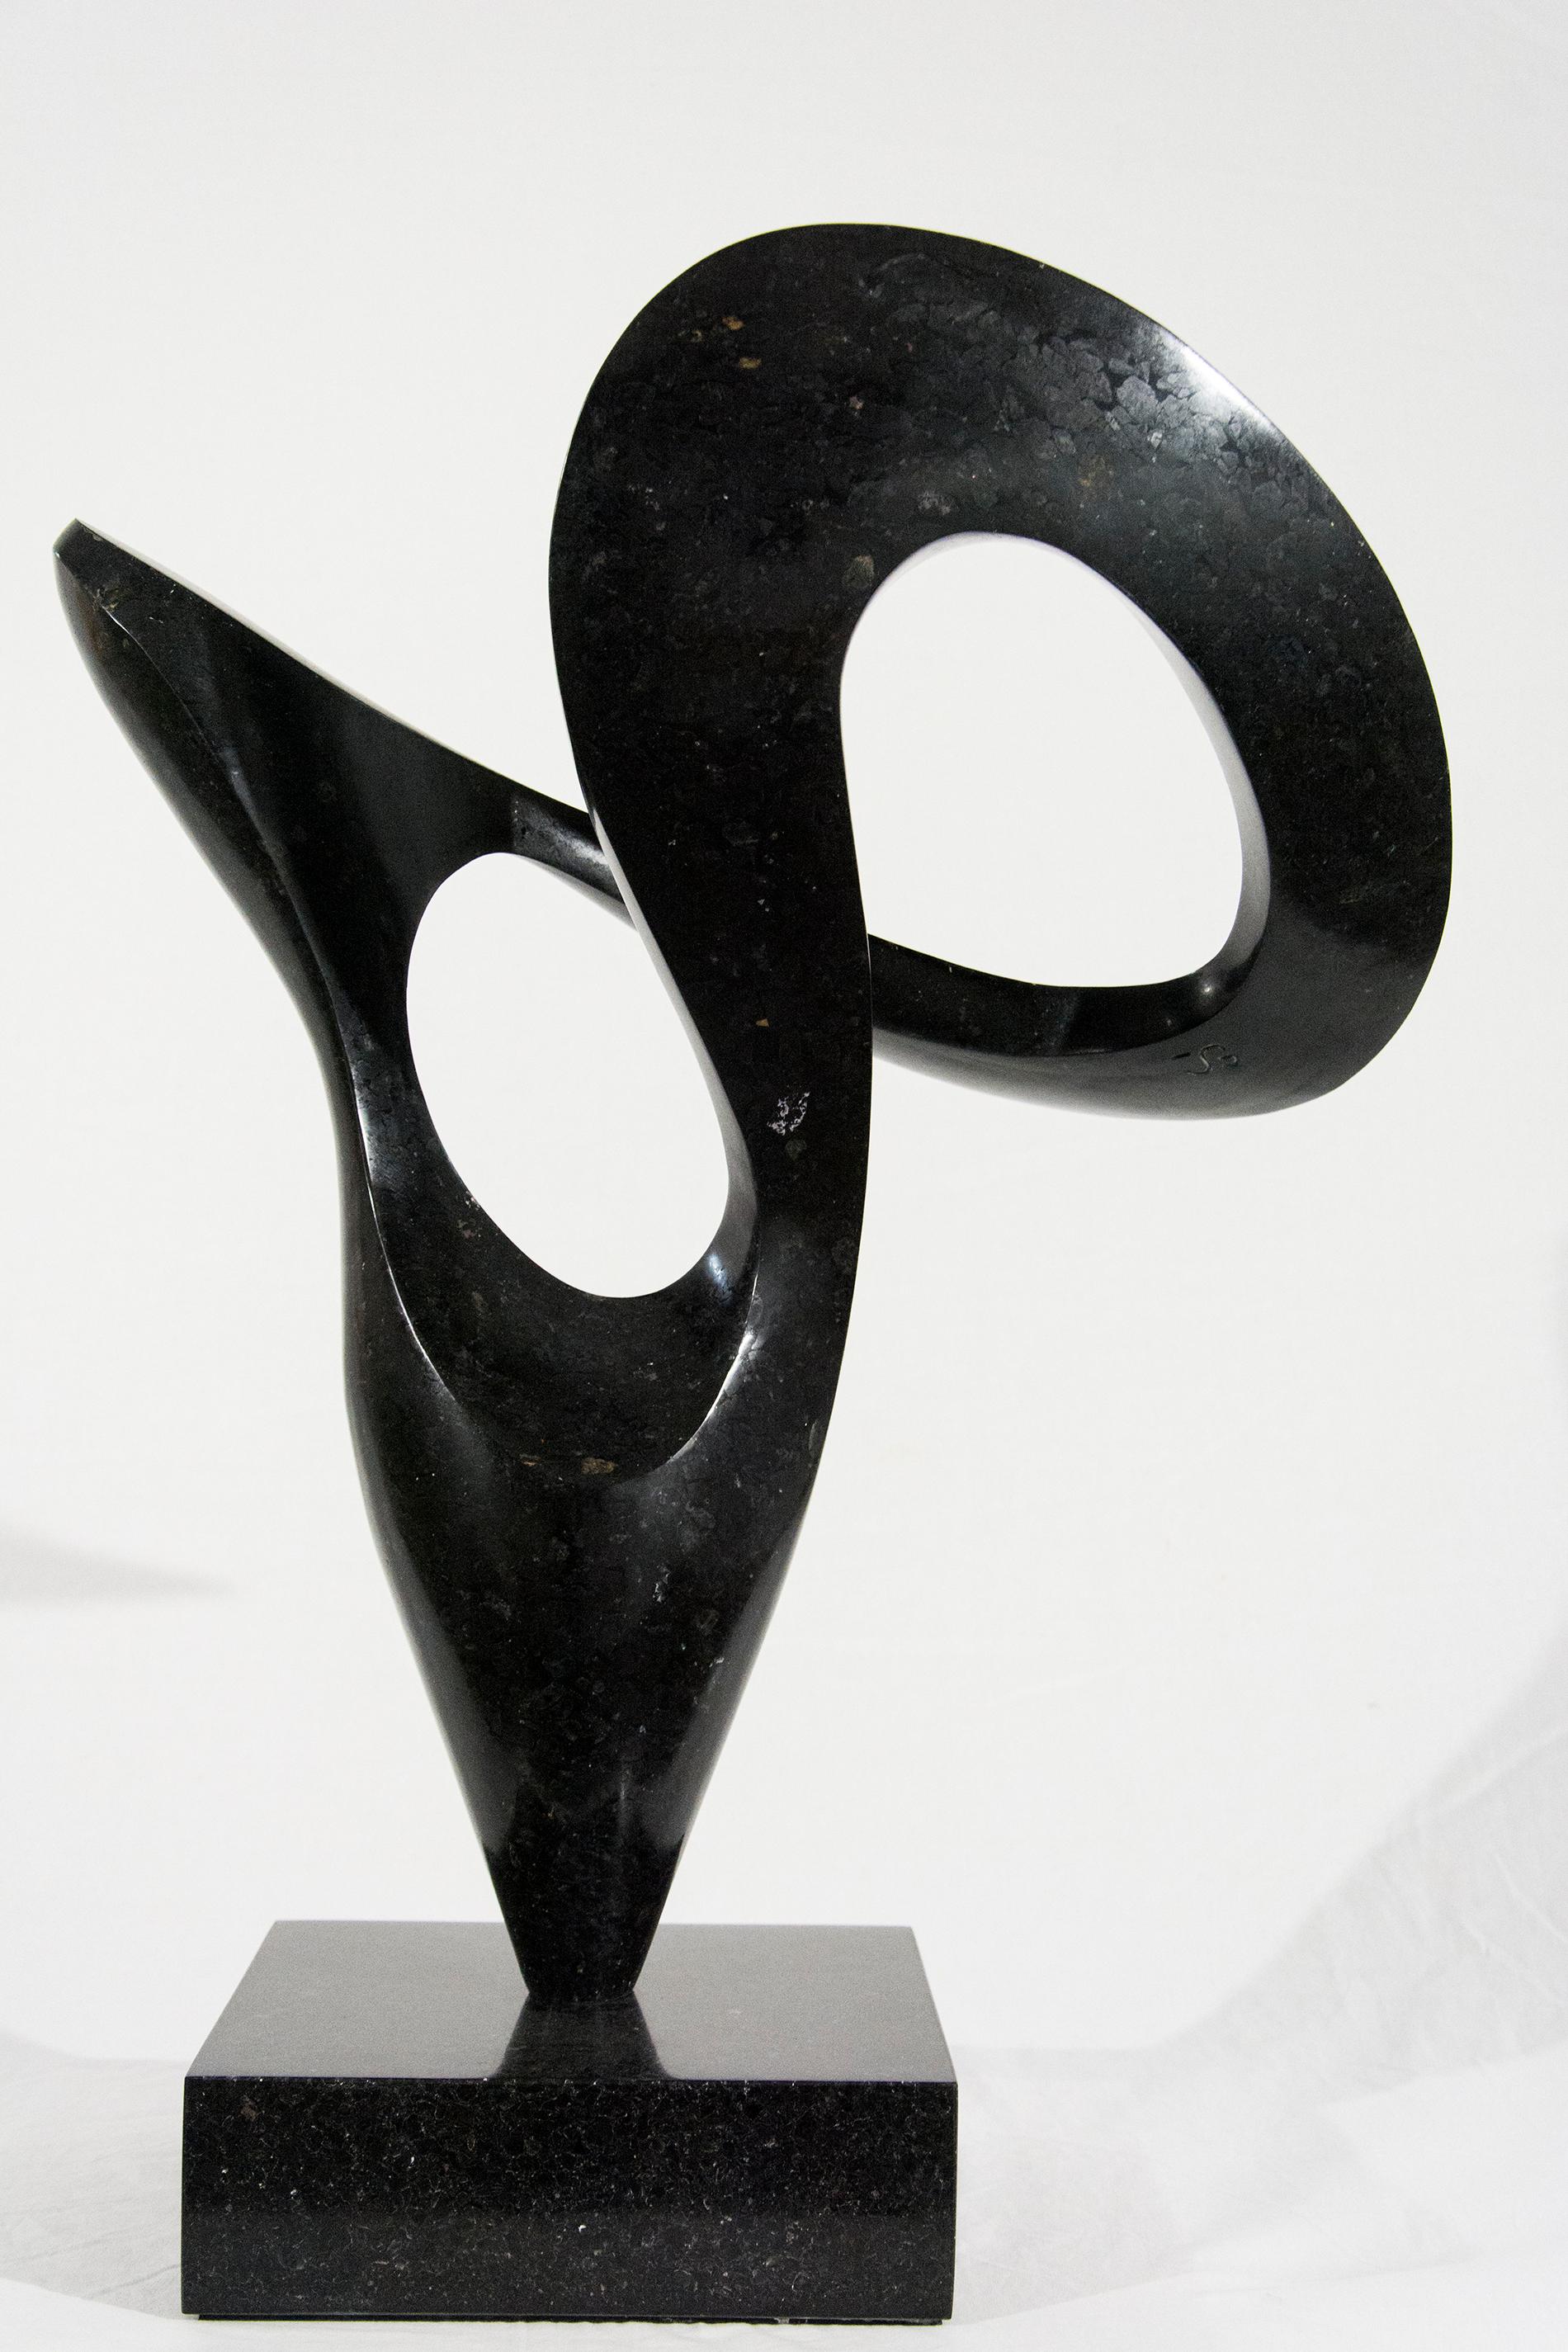 Pirouette 7/20 - Gray Abstract Sculpture by Jeremy Guy